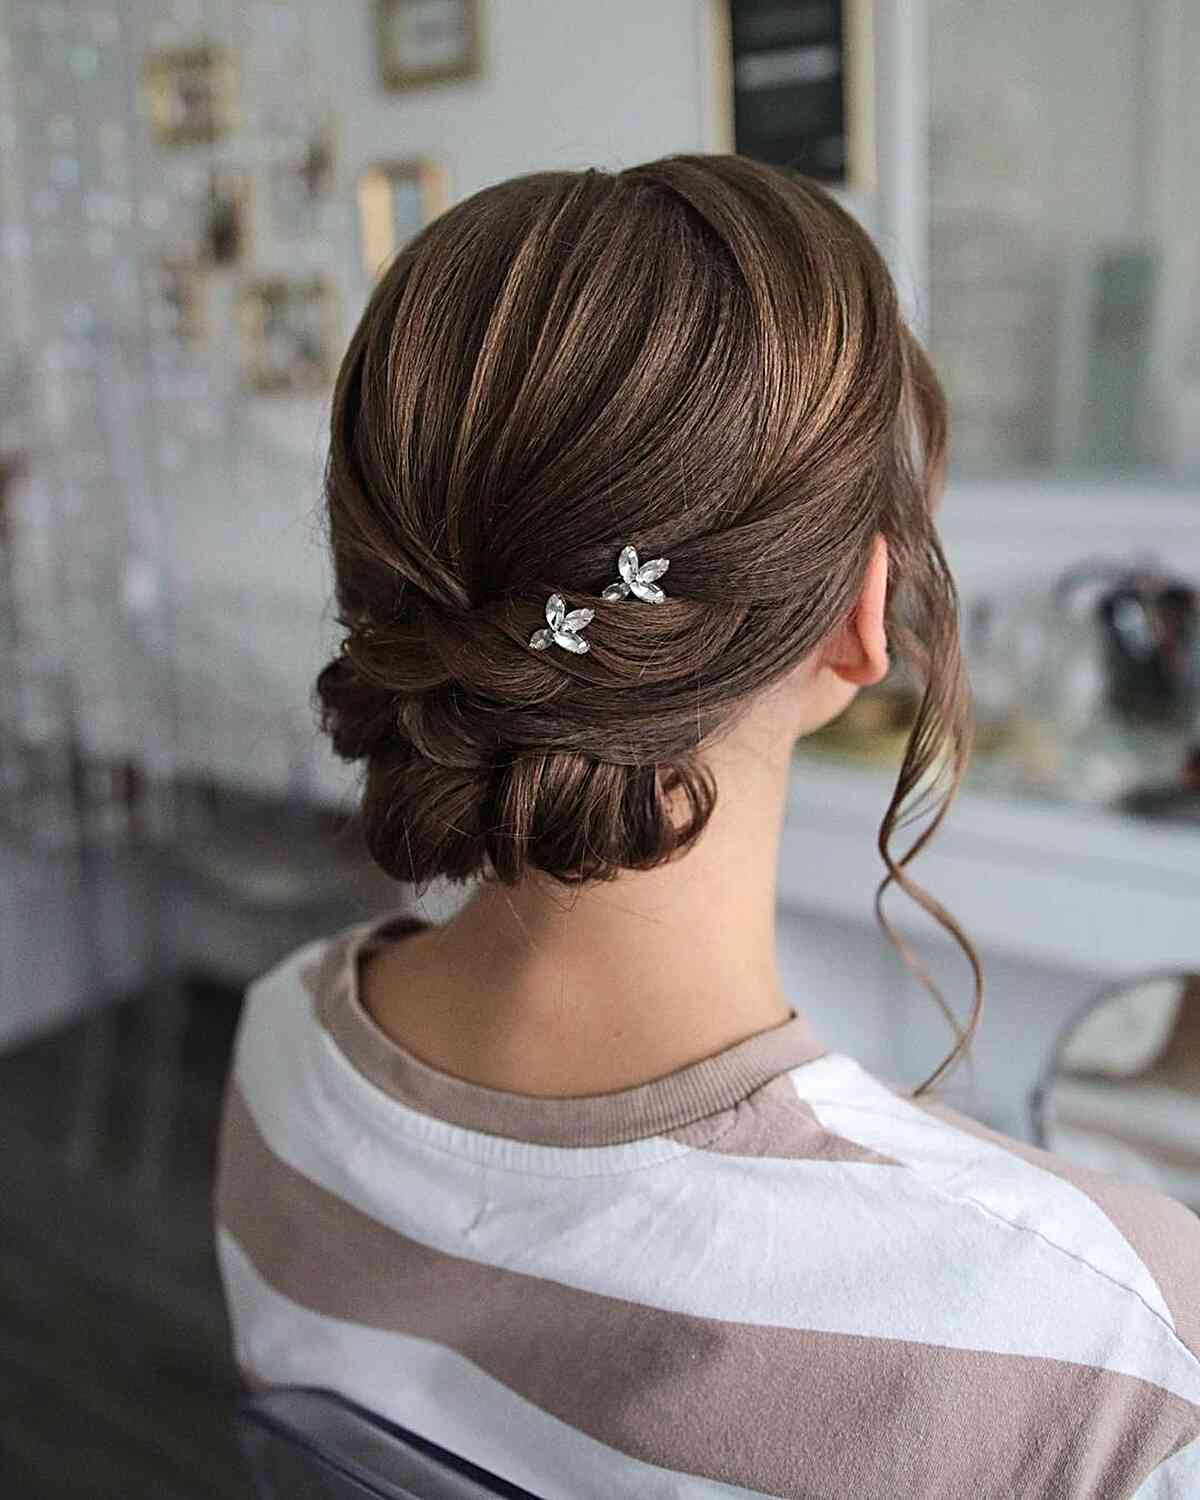 Prom Relaxed Rope Braid in a Low Bun for Mid-Length Hair